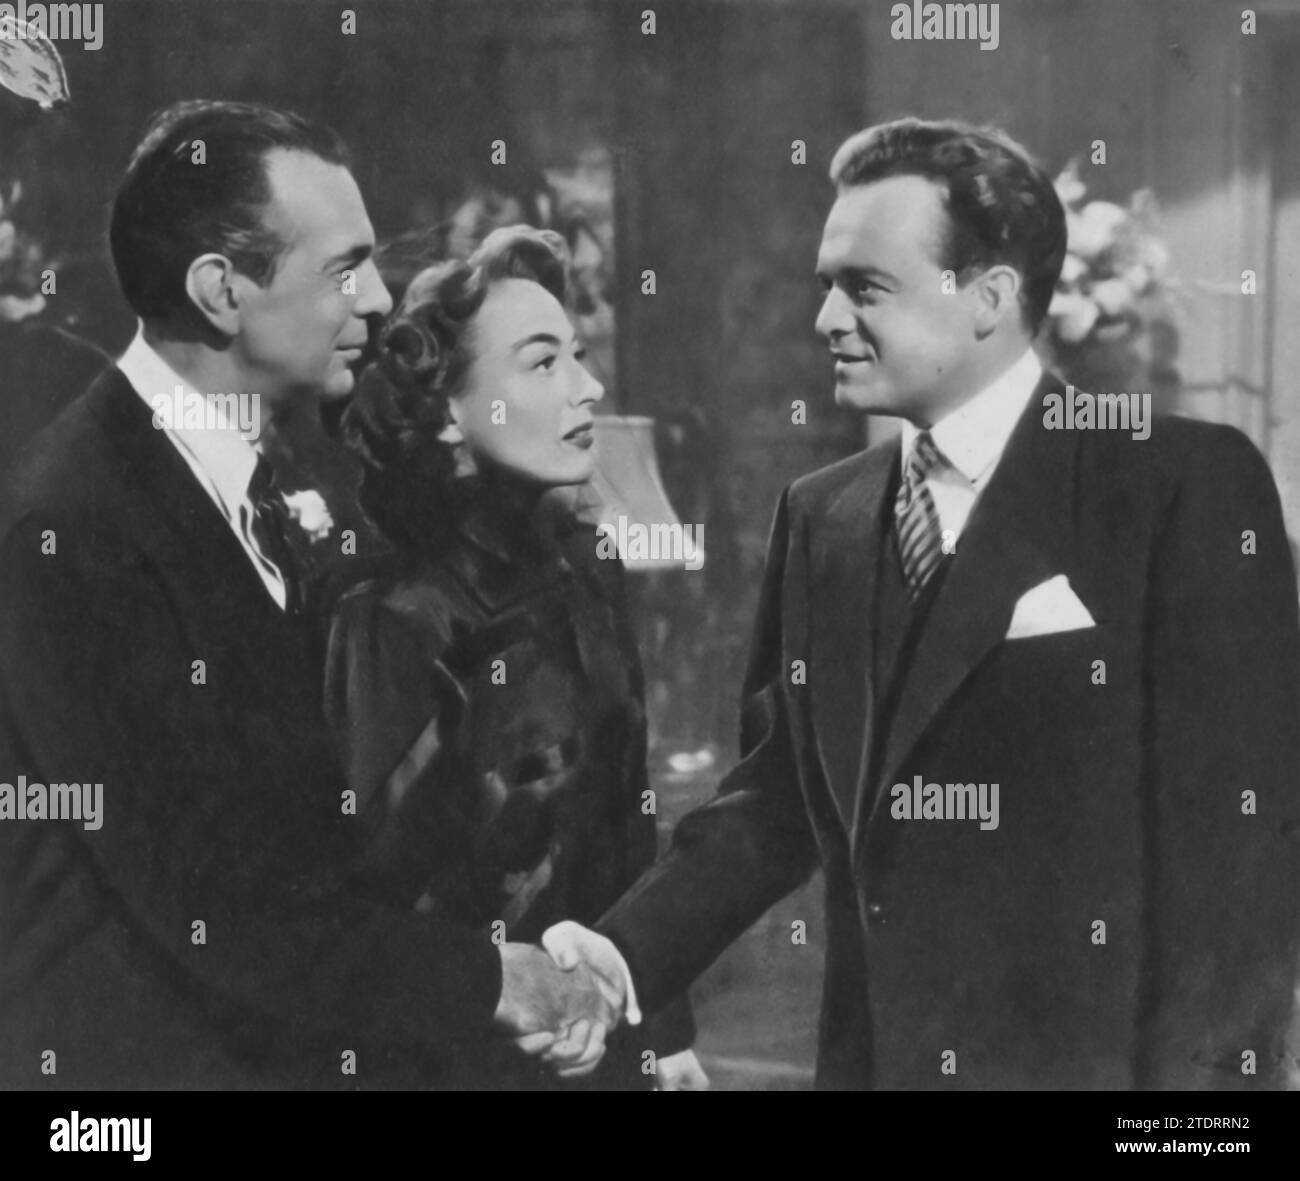 Joan Crawford, Van Heflin, and Raymond Massey star in 'Possessed' (1947). Crawford delivers an intense performance as a mentally unstable woman obsessed with Heflin's character, while Massey plays the supportive yet oblivious husband. Their interplay creates a tense and gripping narrative, showcasing Crawford's depth as an actress, a role that earned her an Academy Award nomination. Stock Photo